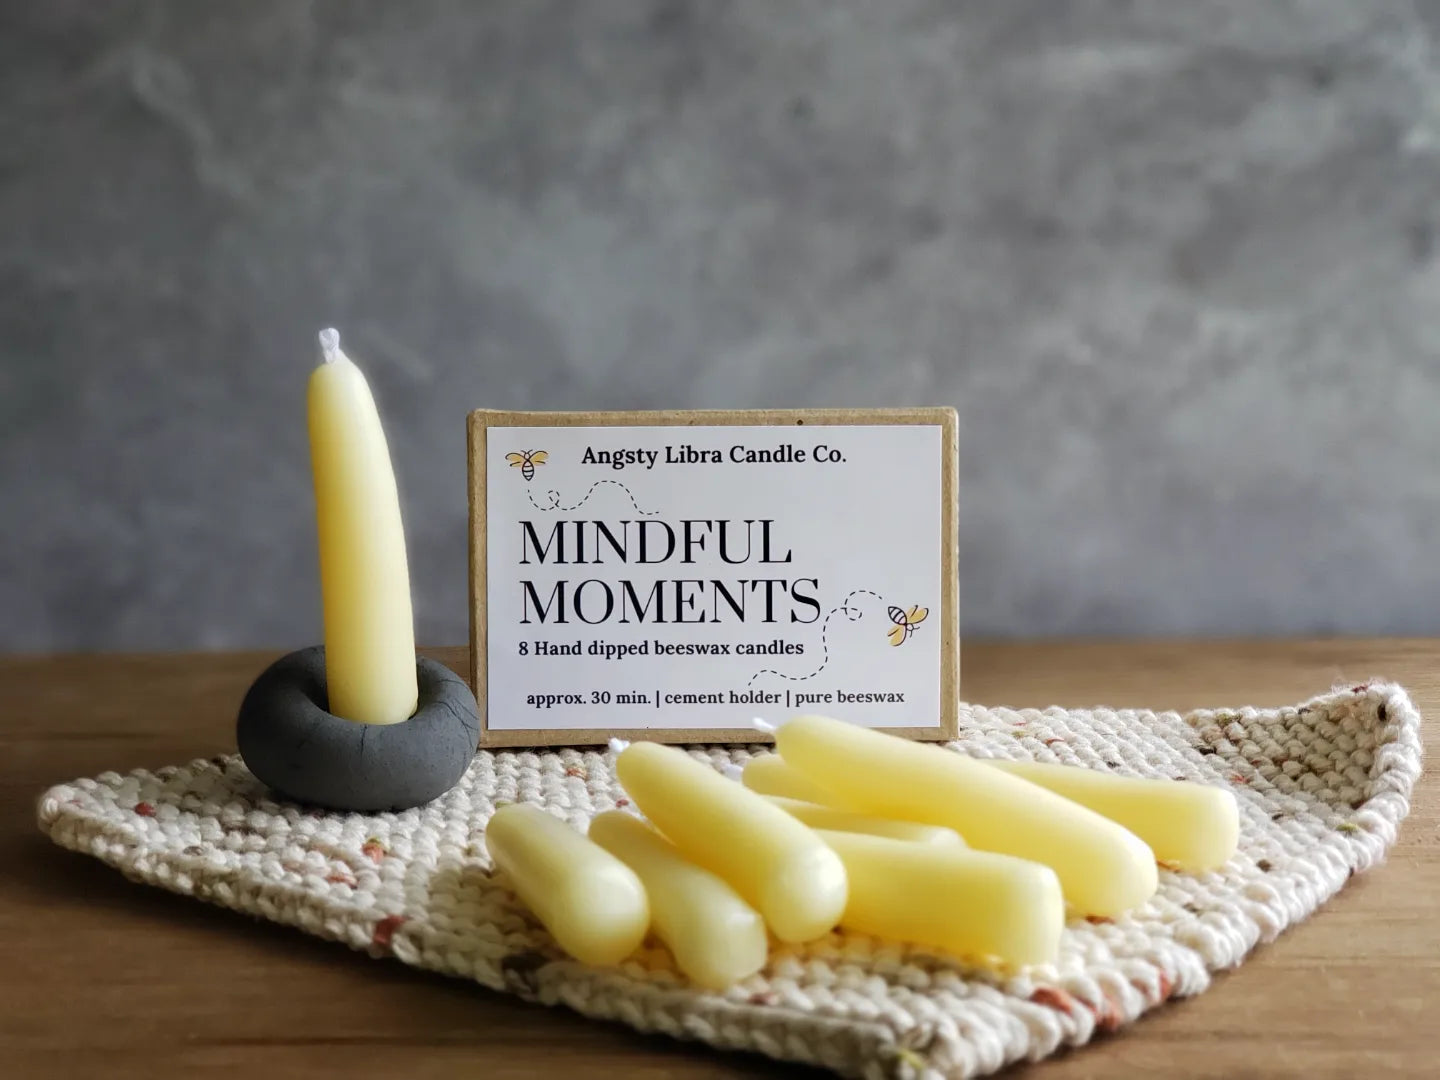 Mindful Moments beeswax candles